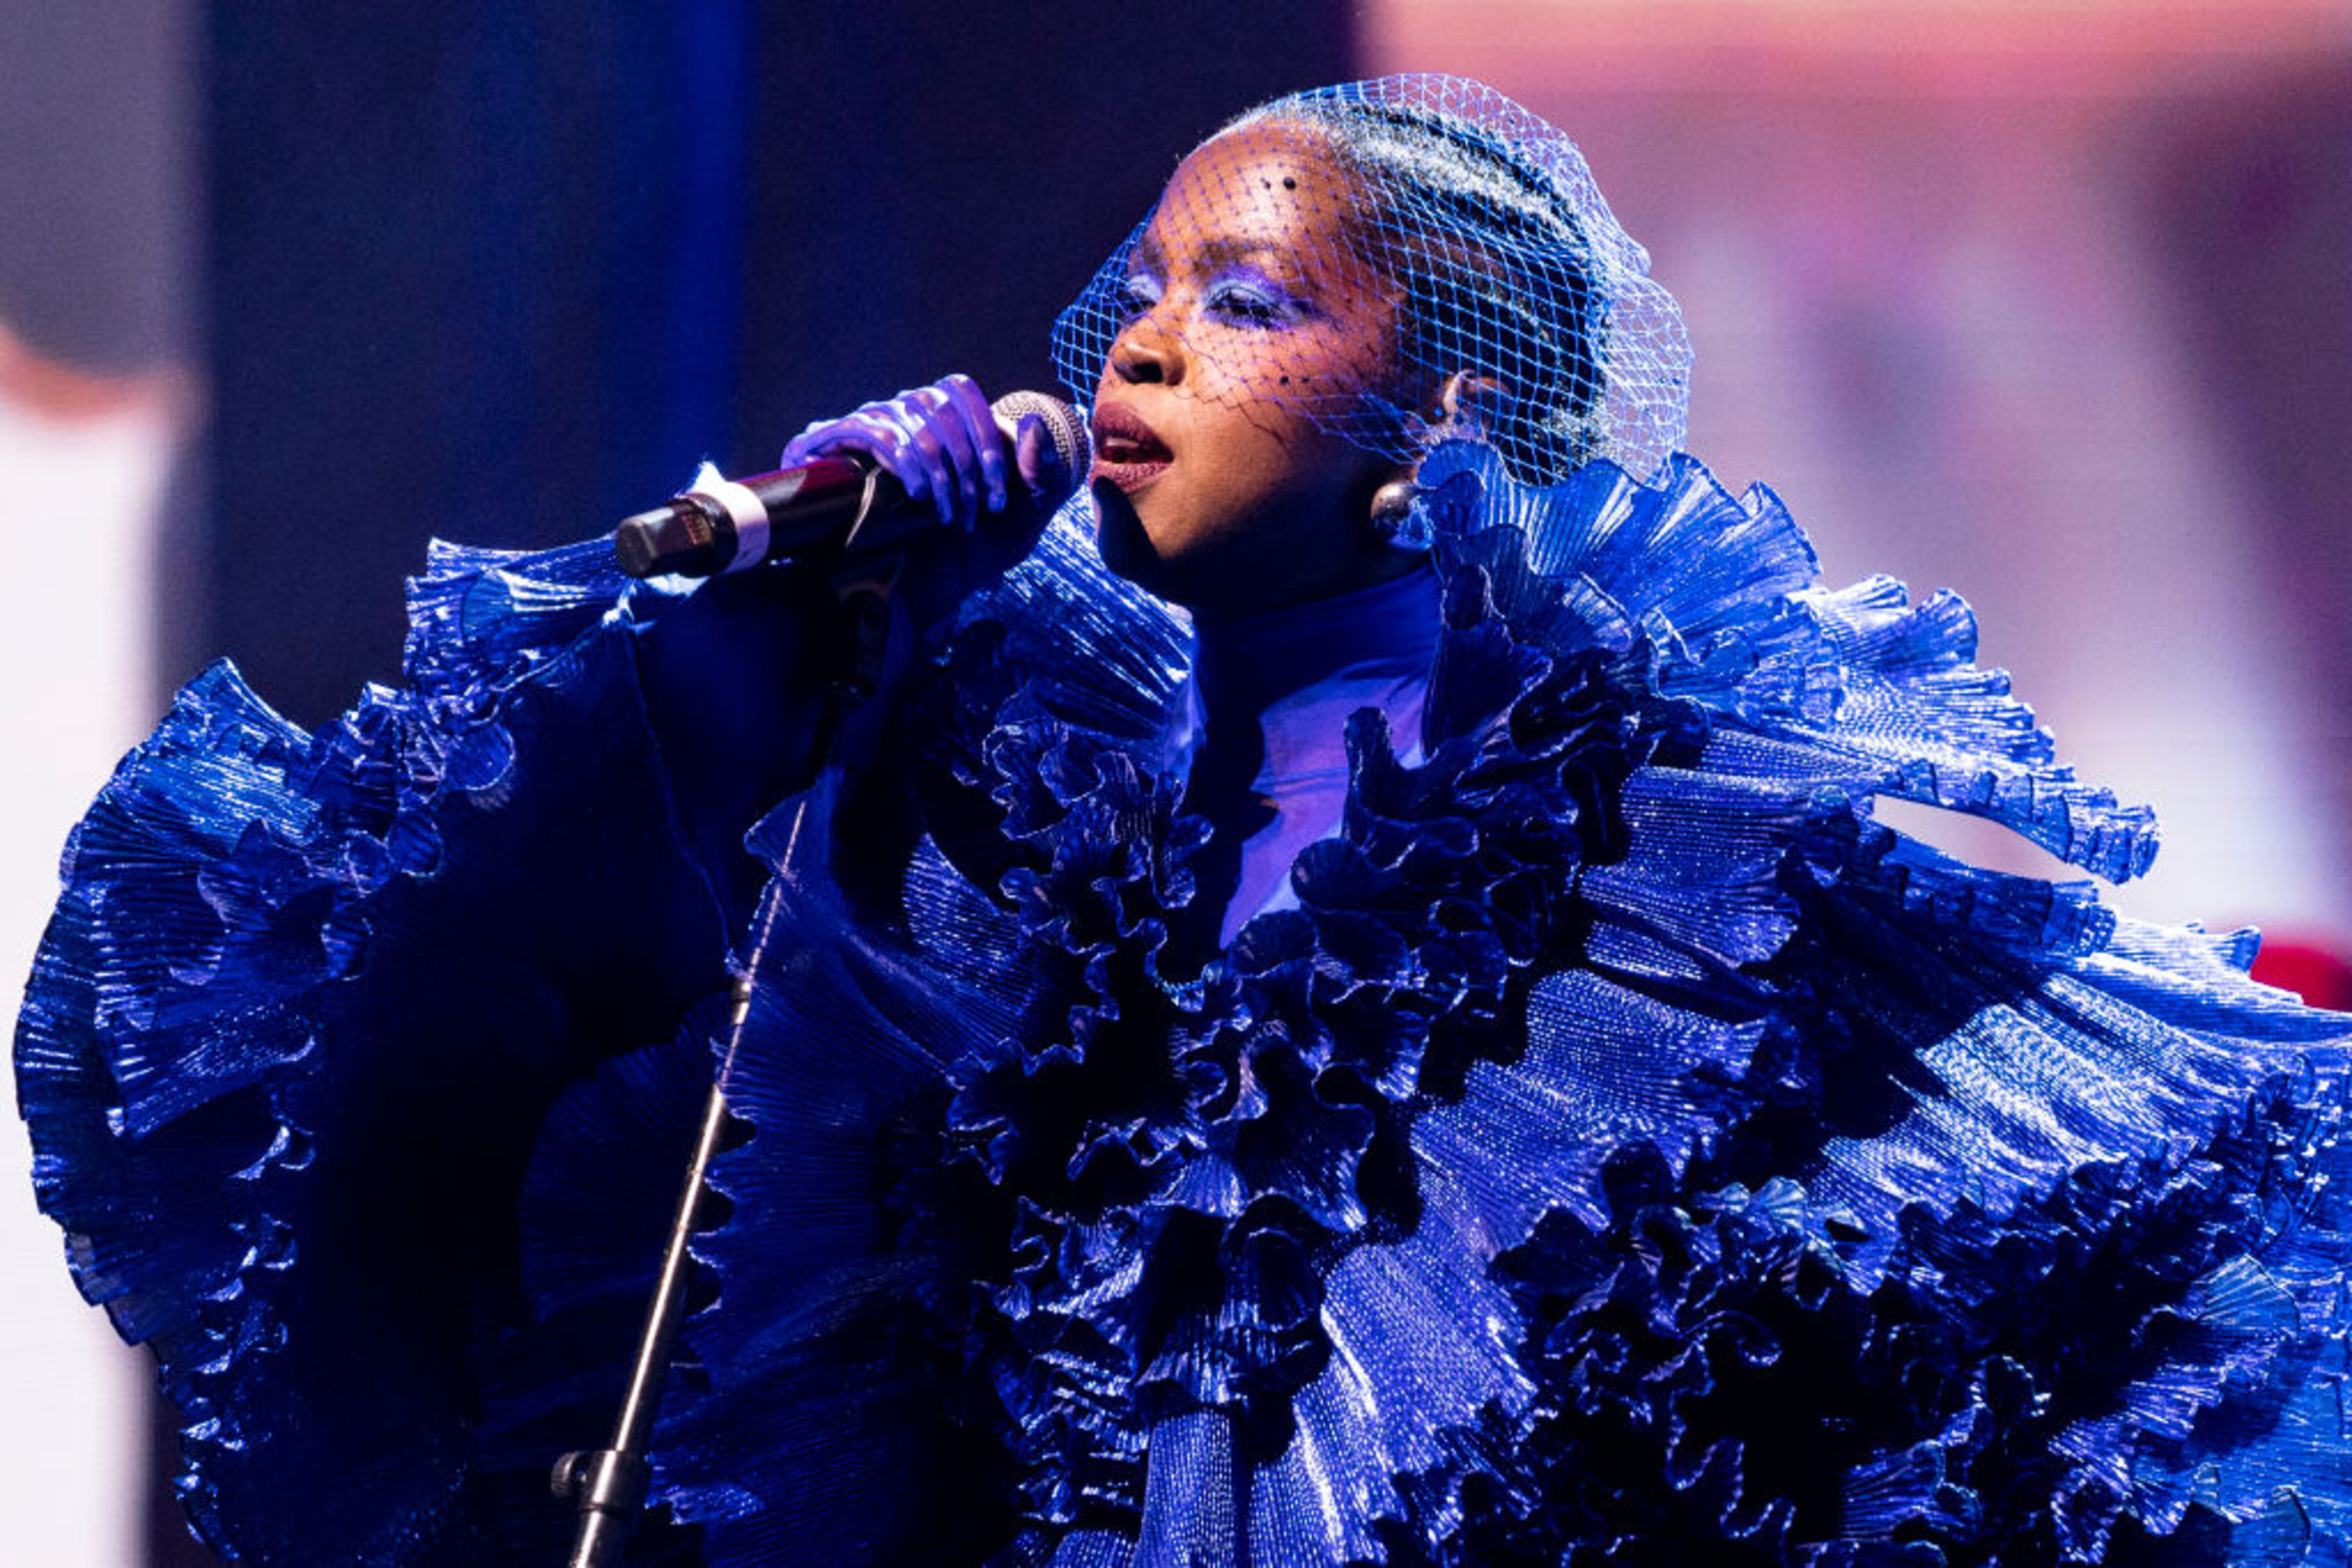 <p>Lauryn Hill started her career as one-third of the hip-hop group Fugees. She was often critiqued as being a bright light in the group. Once the Fugees disbanded, Hill embarked on a solo career and released her critically acclaimed album, <em>The Miseducation of Lauryn Hill.</em> She fused neo-soul with hip-hop and highlighted topics of independence, love, motherhood, and Black girl magic. She hasn’t released an album since then, but it still remains one of the most talked about albums in music history, and Hill stays booked for shows year-round. </p><p><a href='https://www.msn.com/en-us/community/channel/vid-cj9pqbr0vn9in2b6ddcd8sfgpfq6x6utp44fssrv6mc2gtybw0us'>Follow us on MSN to see more of our exclusive entertainment content.</a></p>